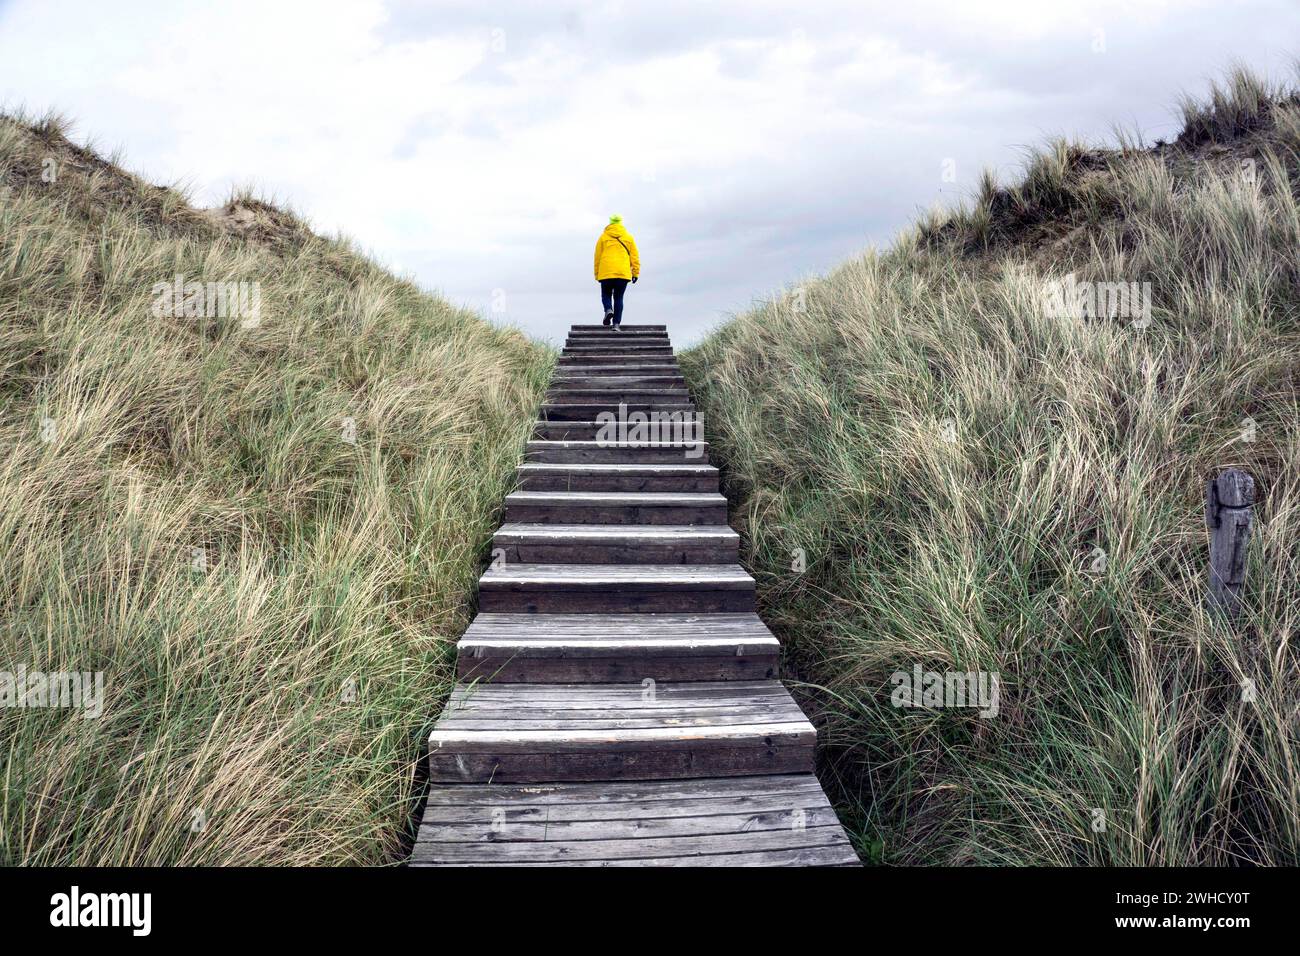 Woman with yellow rain jacket walking over a staircase in the dunes, Amrum Island, Wittduen, 24.05.2021 Stock Photo